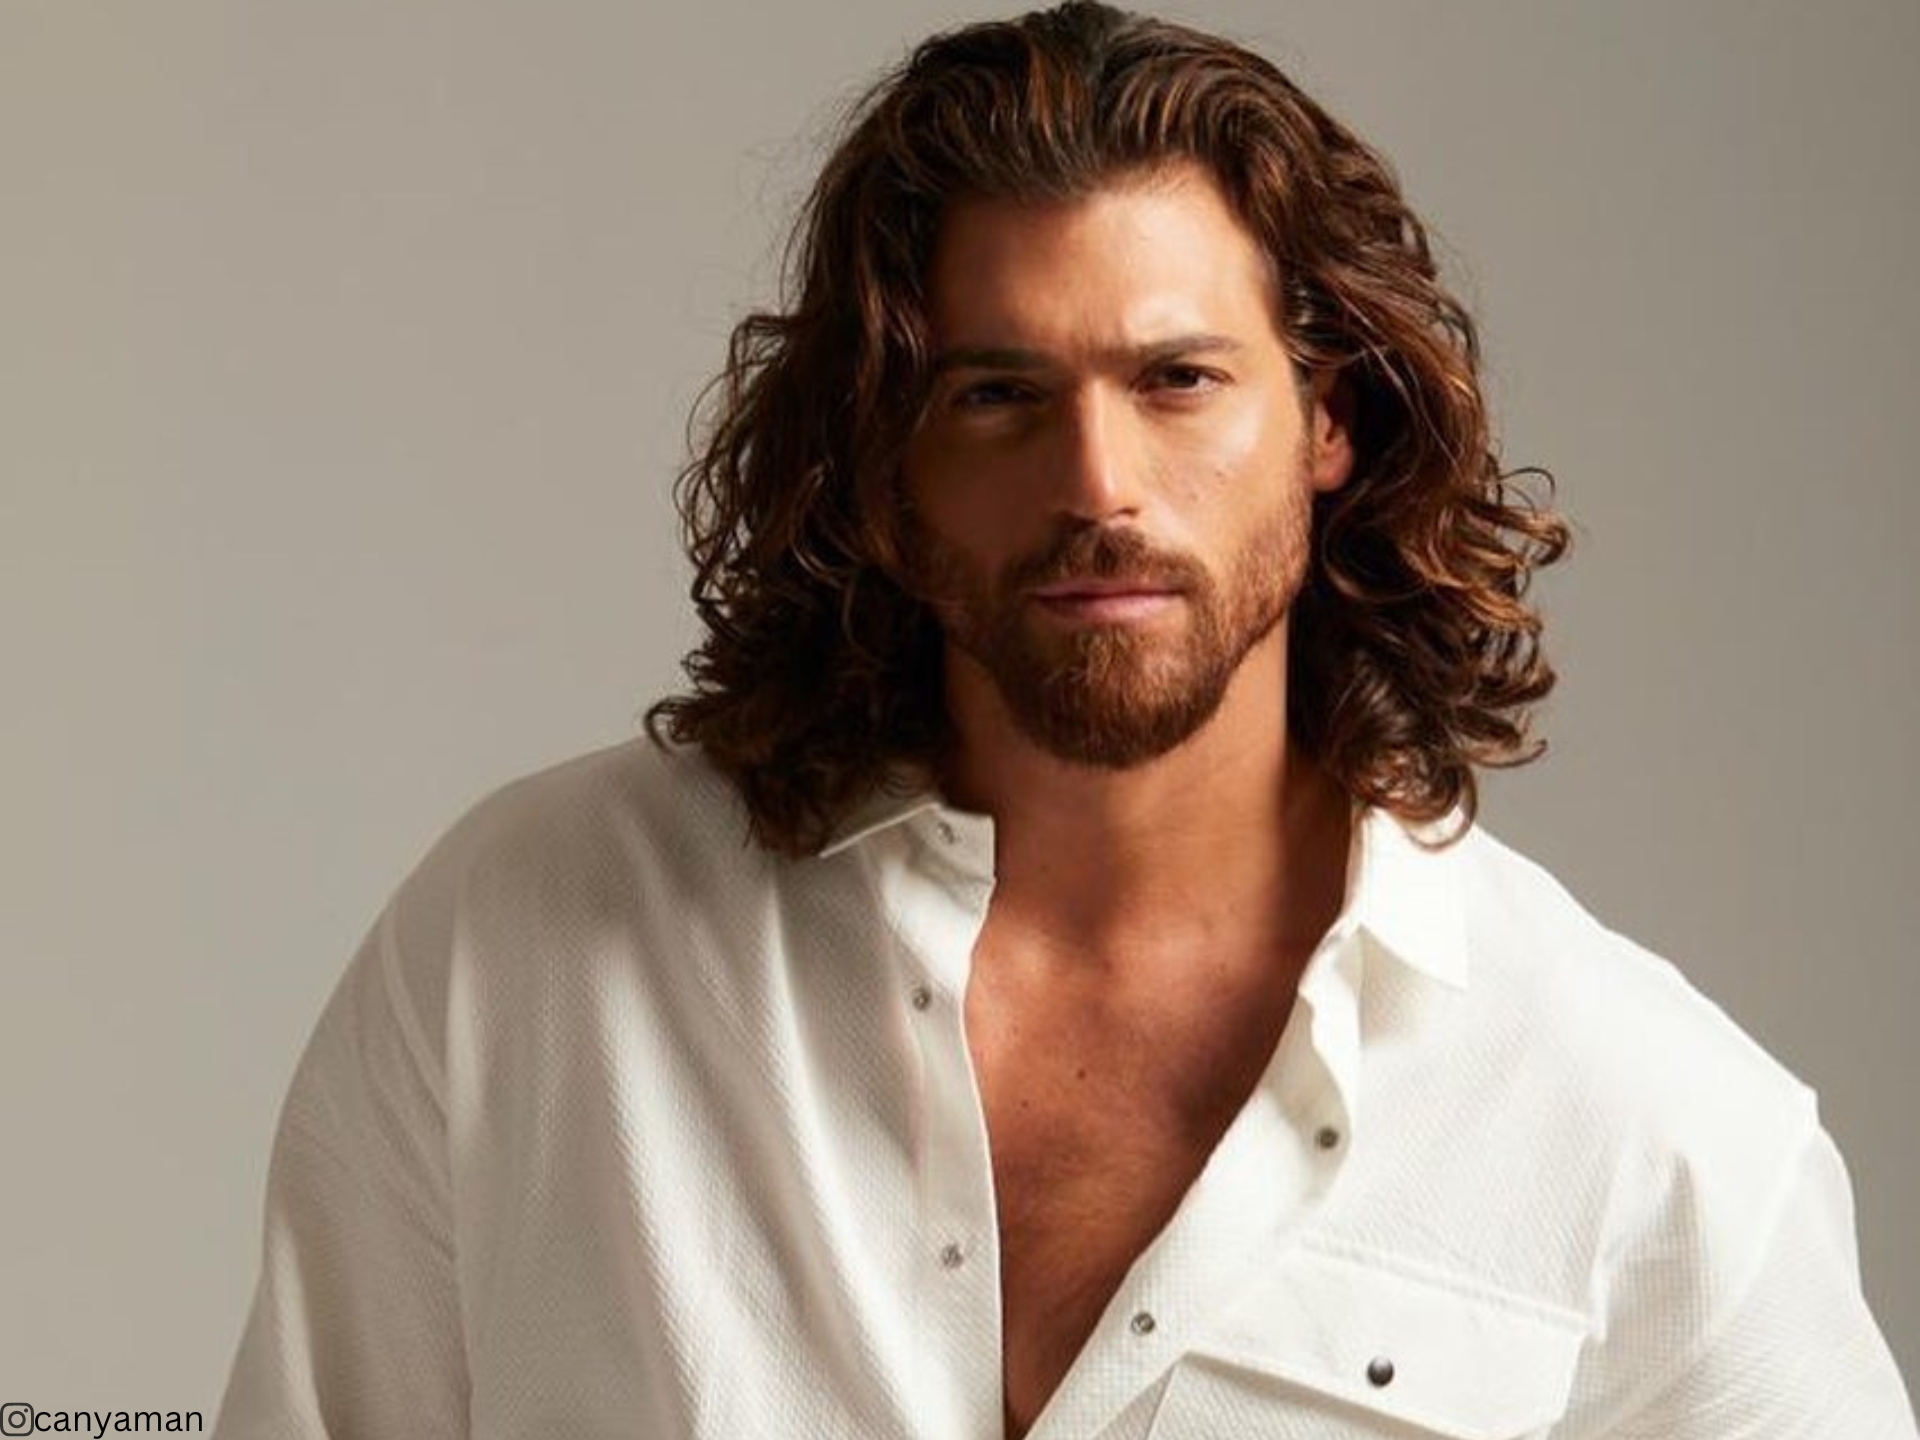 Top 23 Styles For Boys With Curly Hair To Look Super Hot